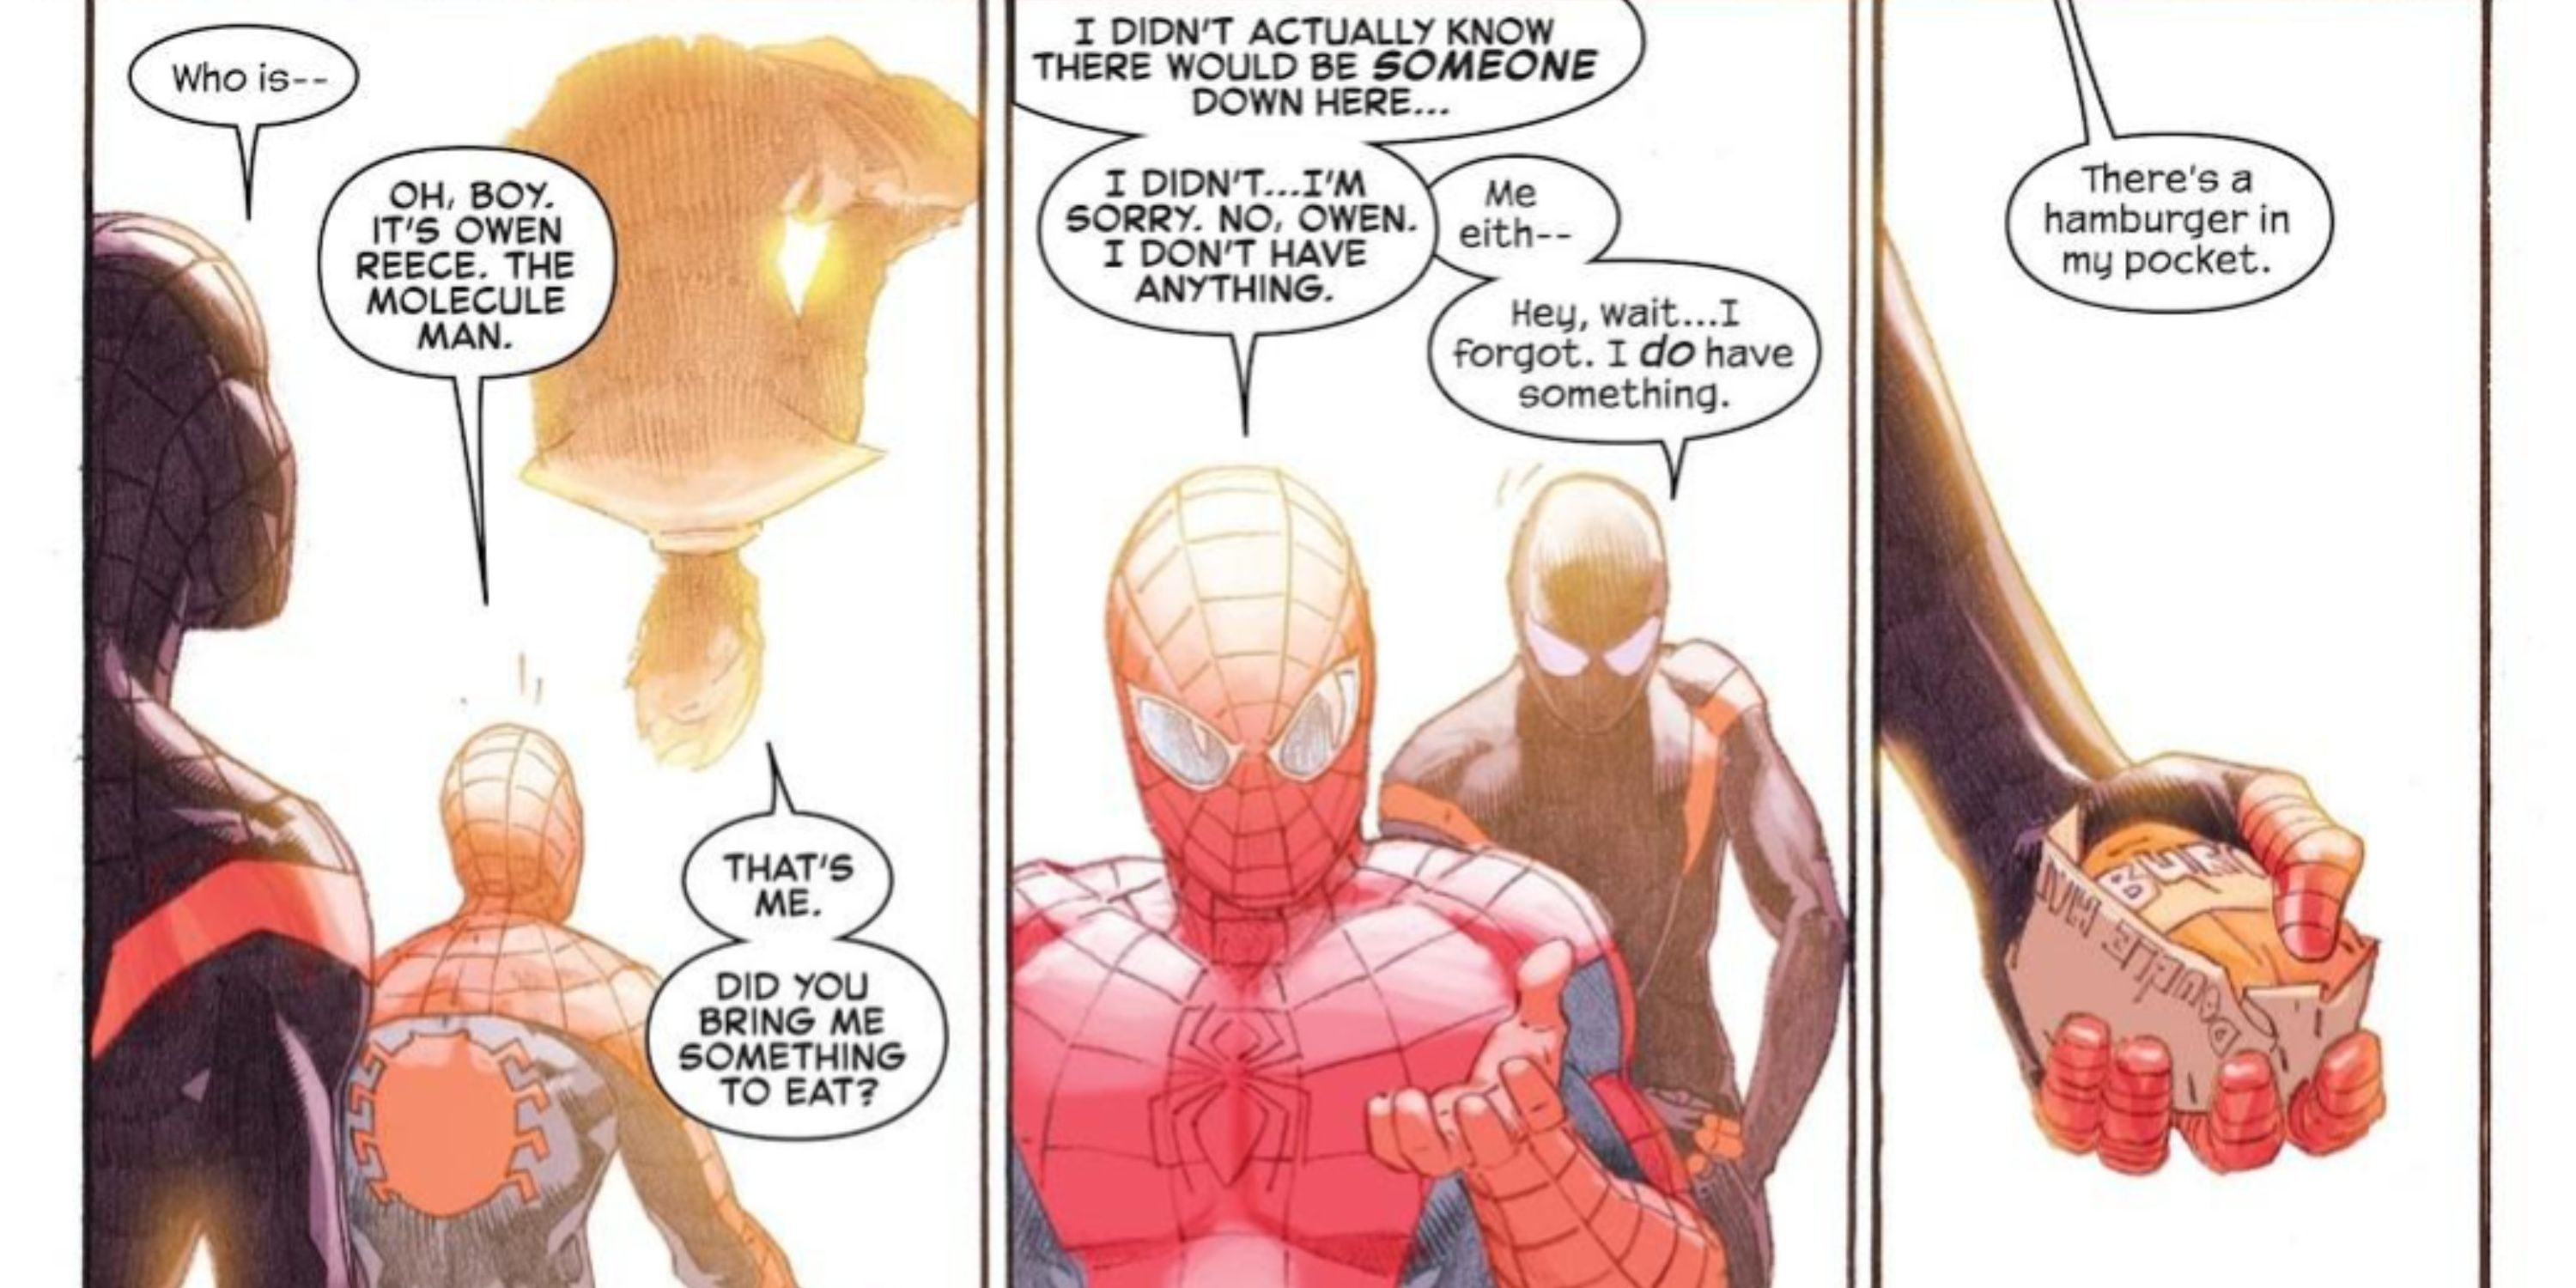 miles morales spider-man with a hamburger, peter parker spider-man and molecule man